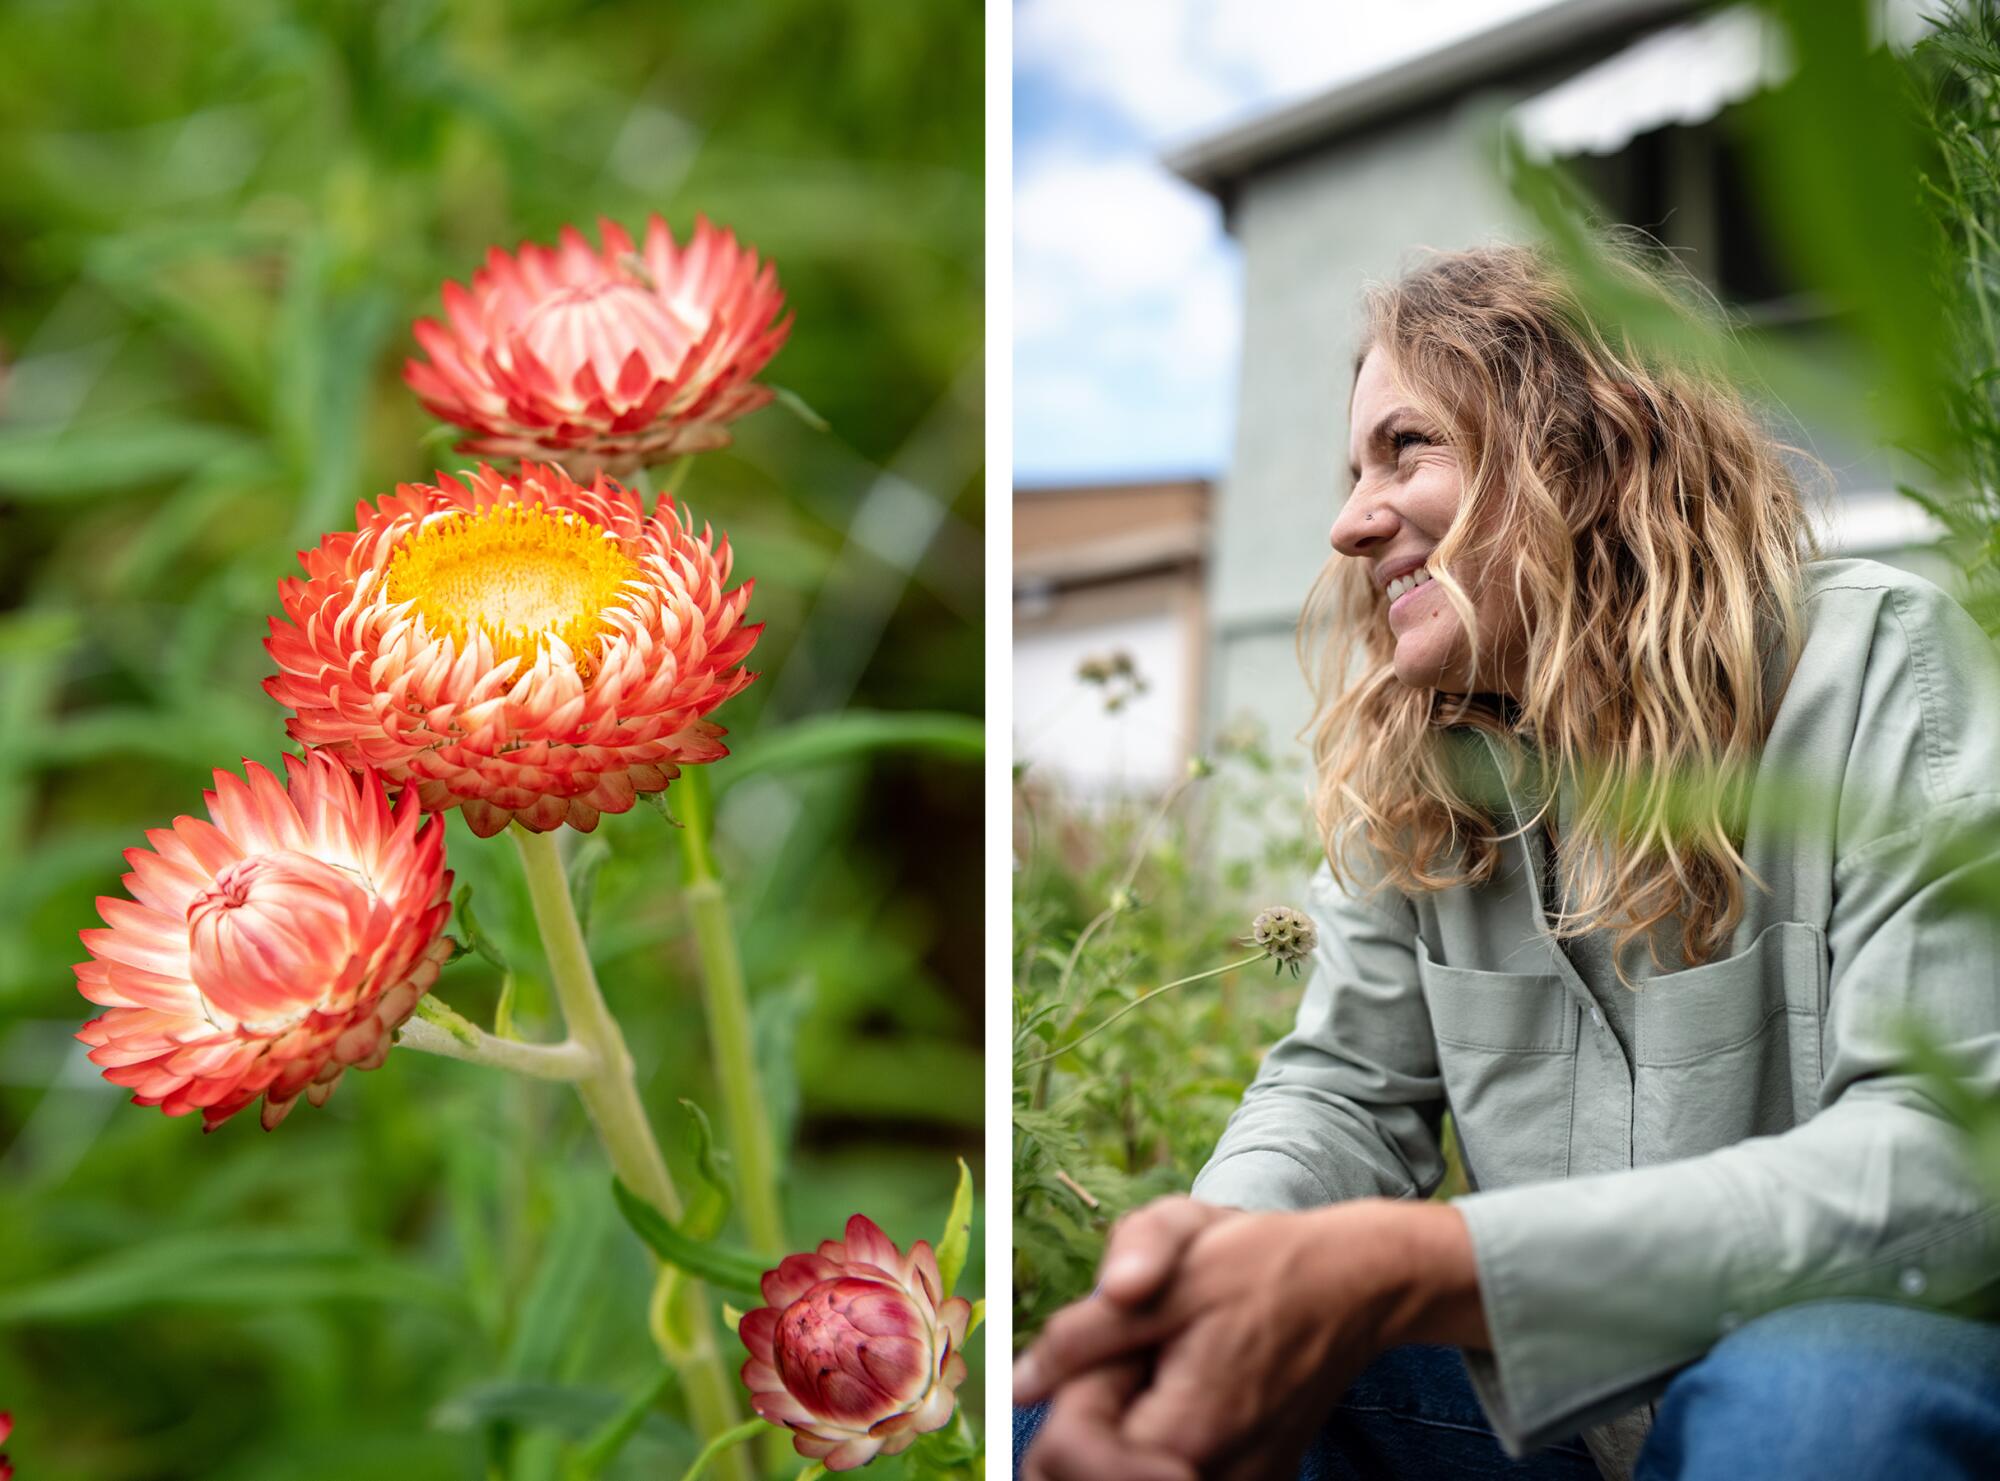 Strawflowers, left, and Rachel Nafis sits among one of the gardens she planted in one of her neighbors yards, right.